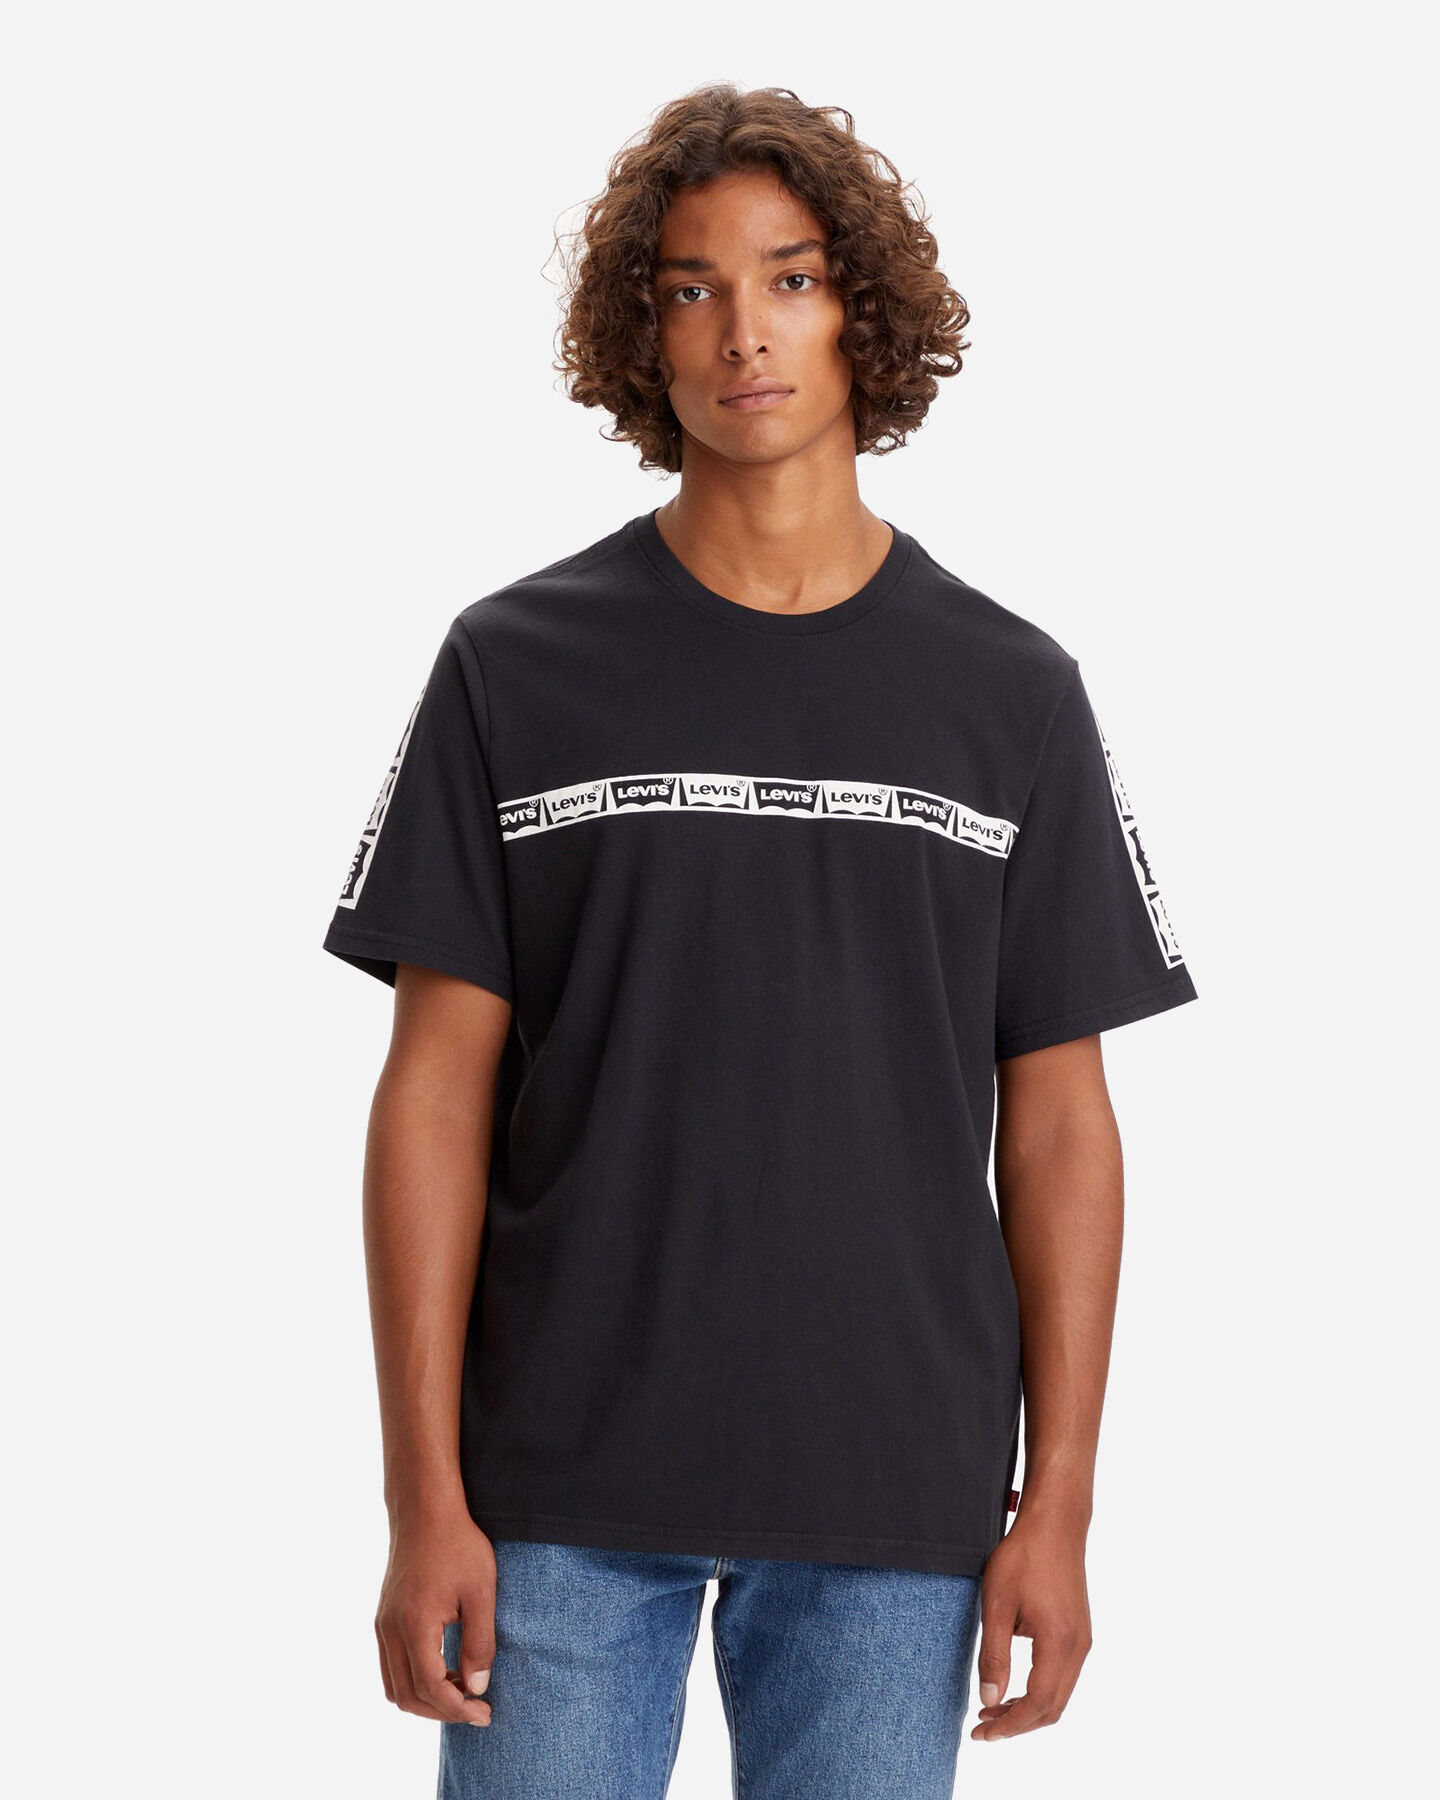  T-Shirt LEVI'S RELAXED STRIPE LOGO M S4113274 scatto 2